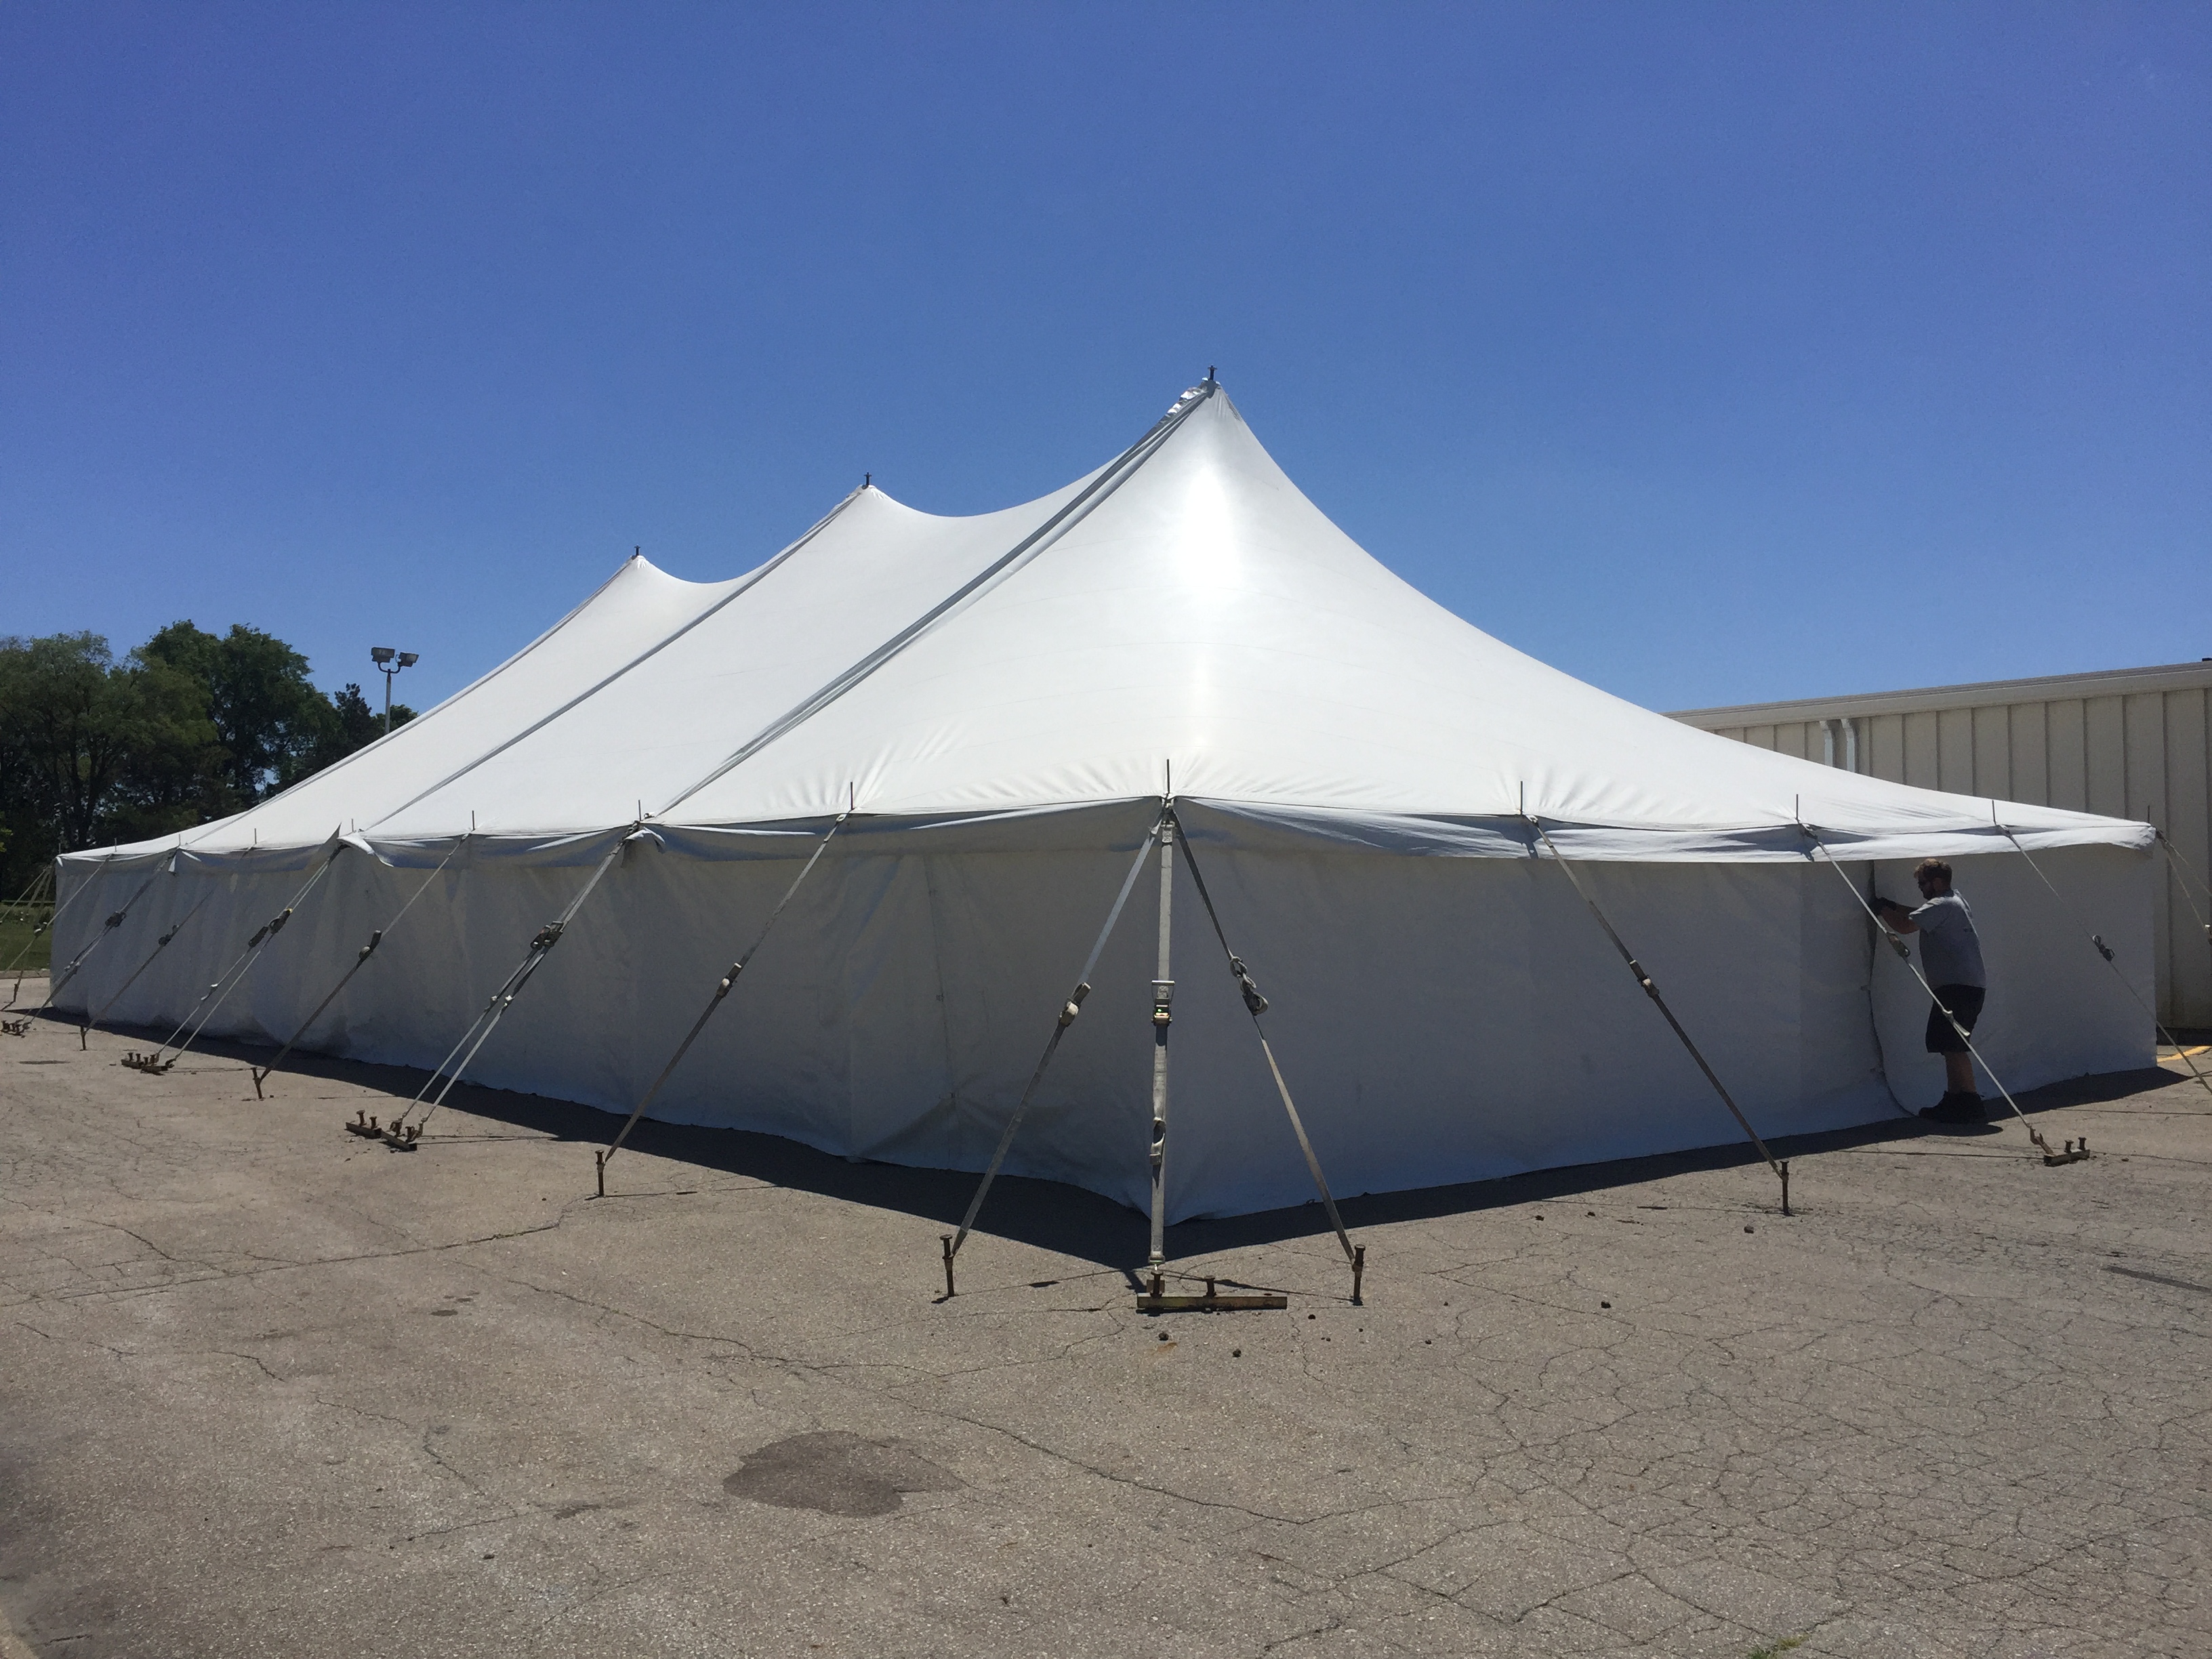 40' x 80' rope and pole tent for Store for Homes Furniture tent sale in Newton, Iowa